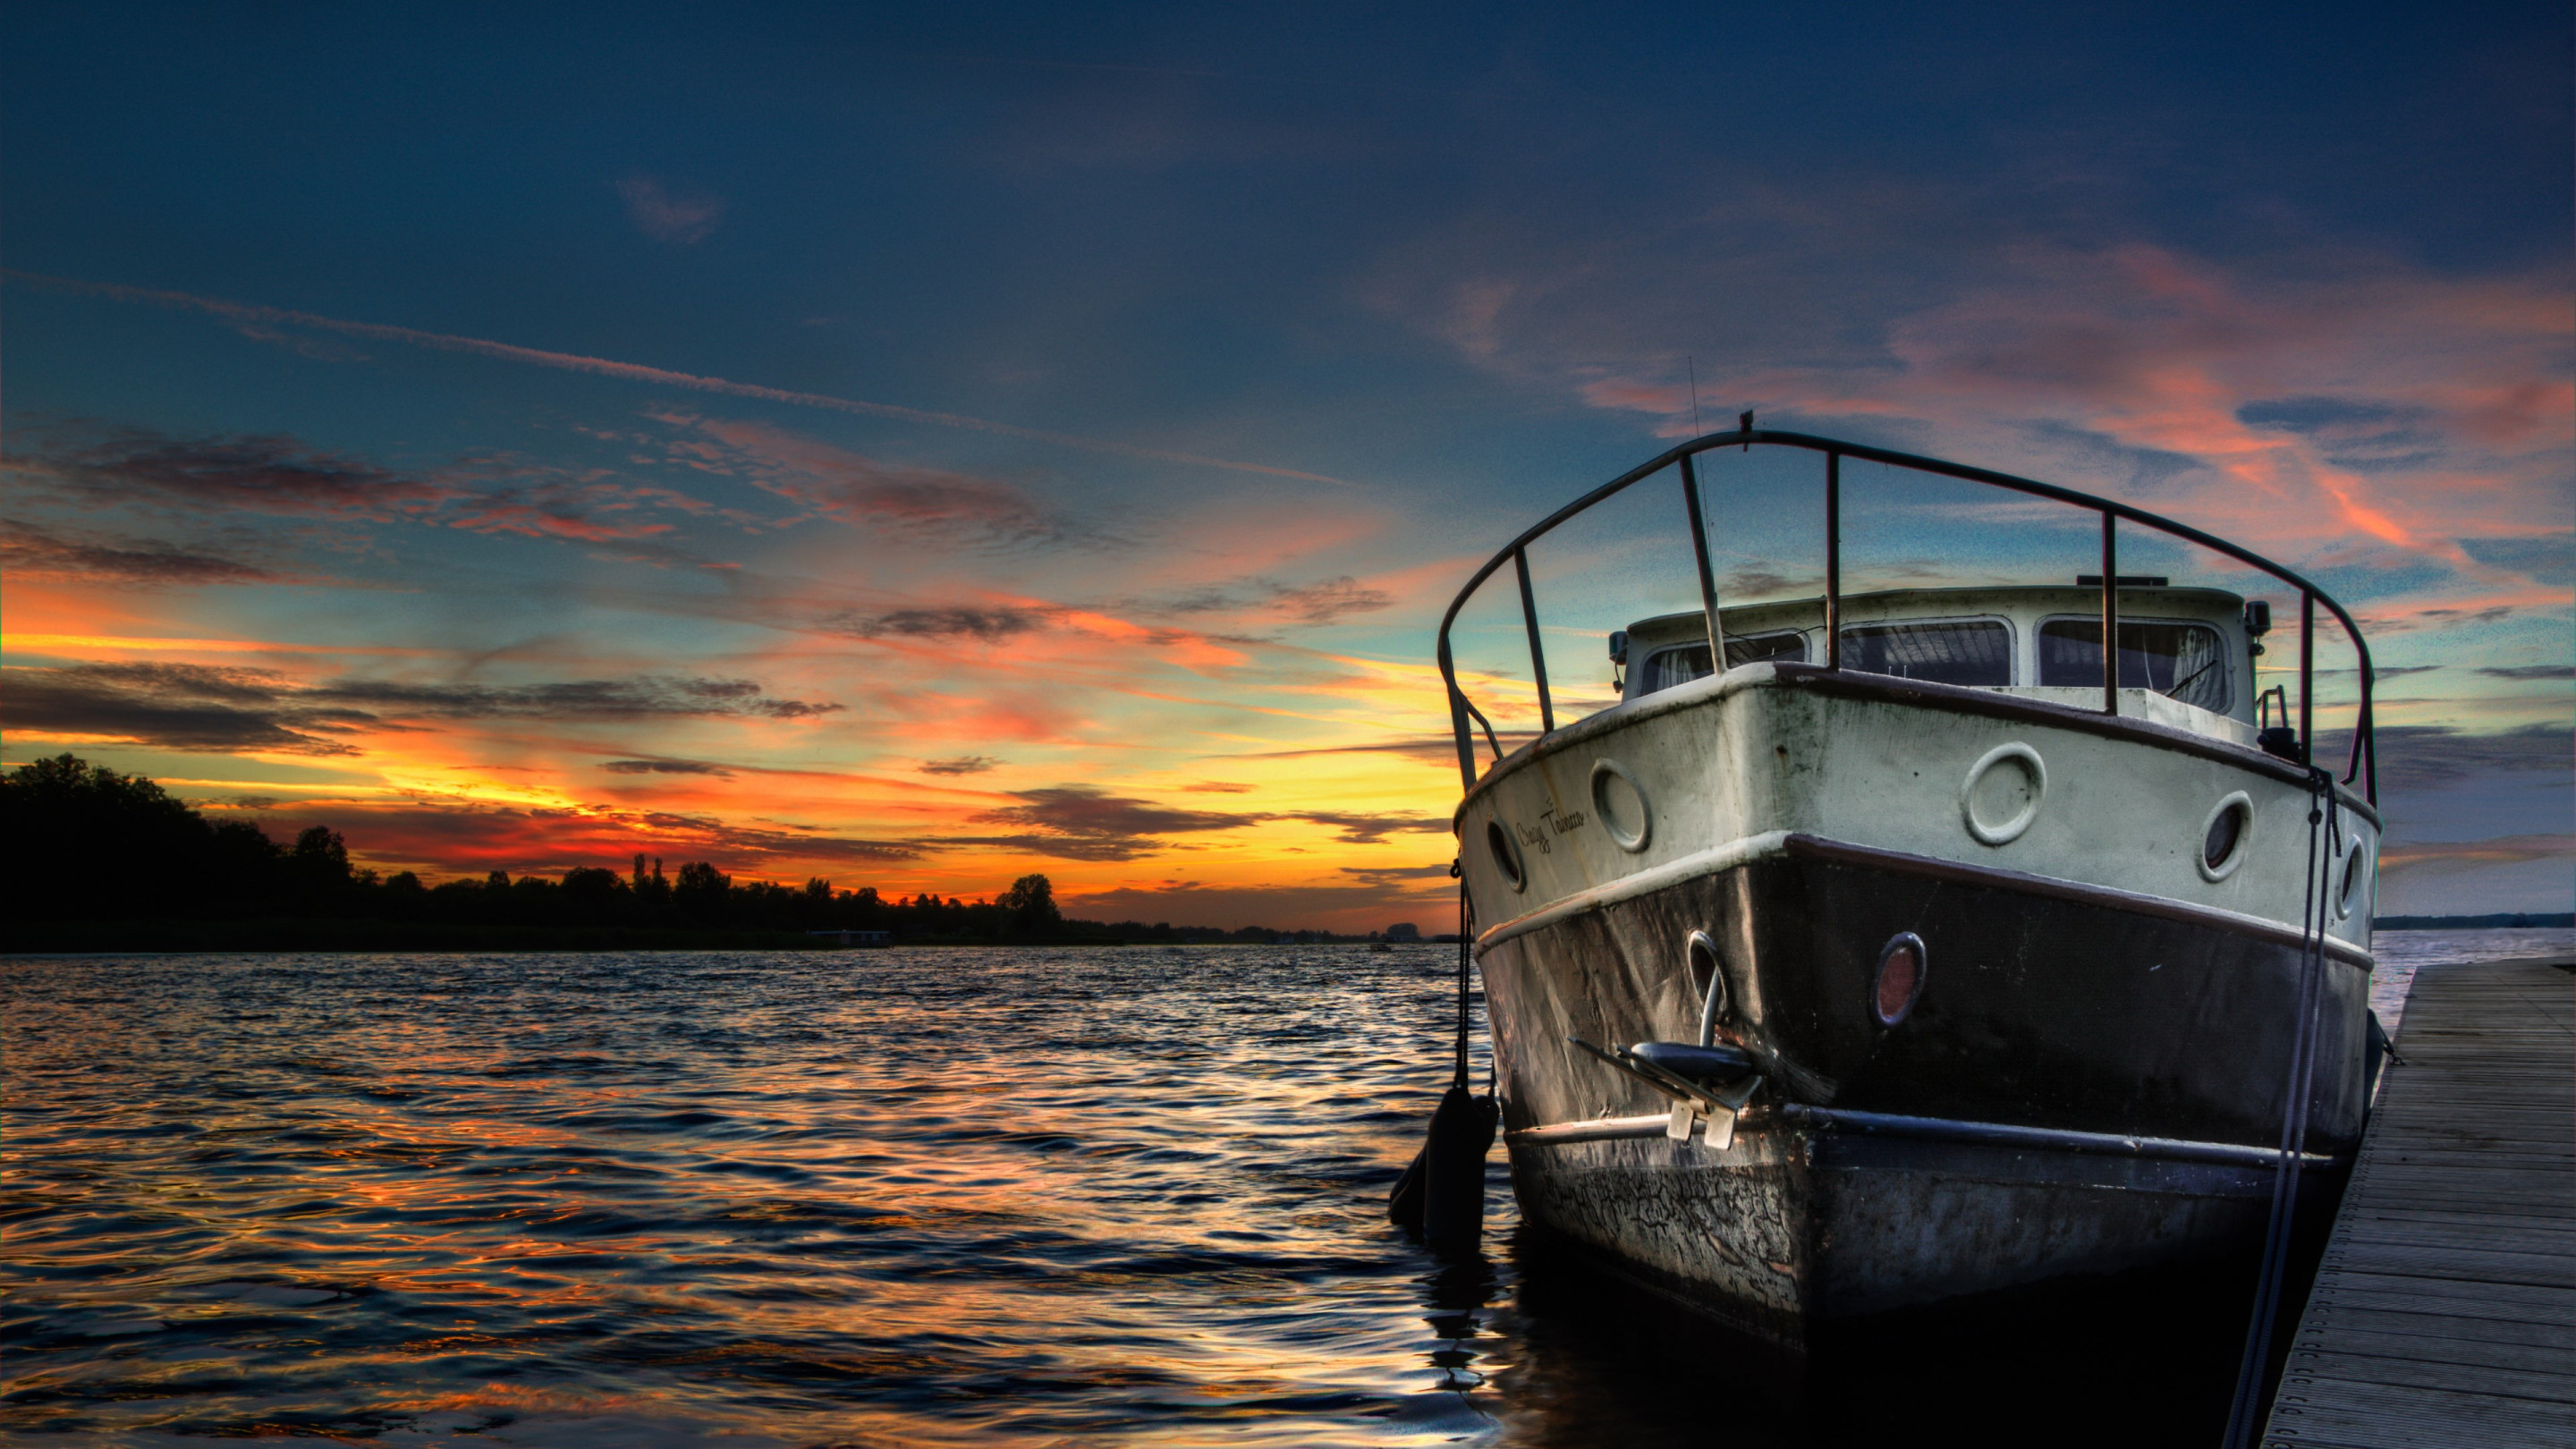 Boat and sunset in background wallpaper 2880x1620